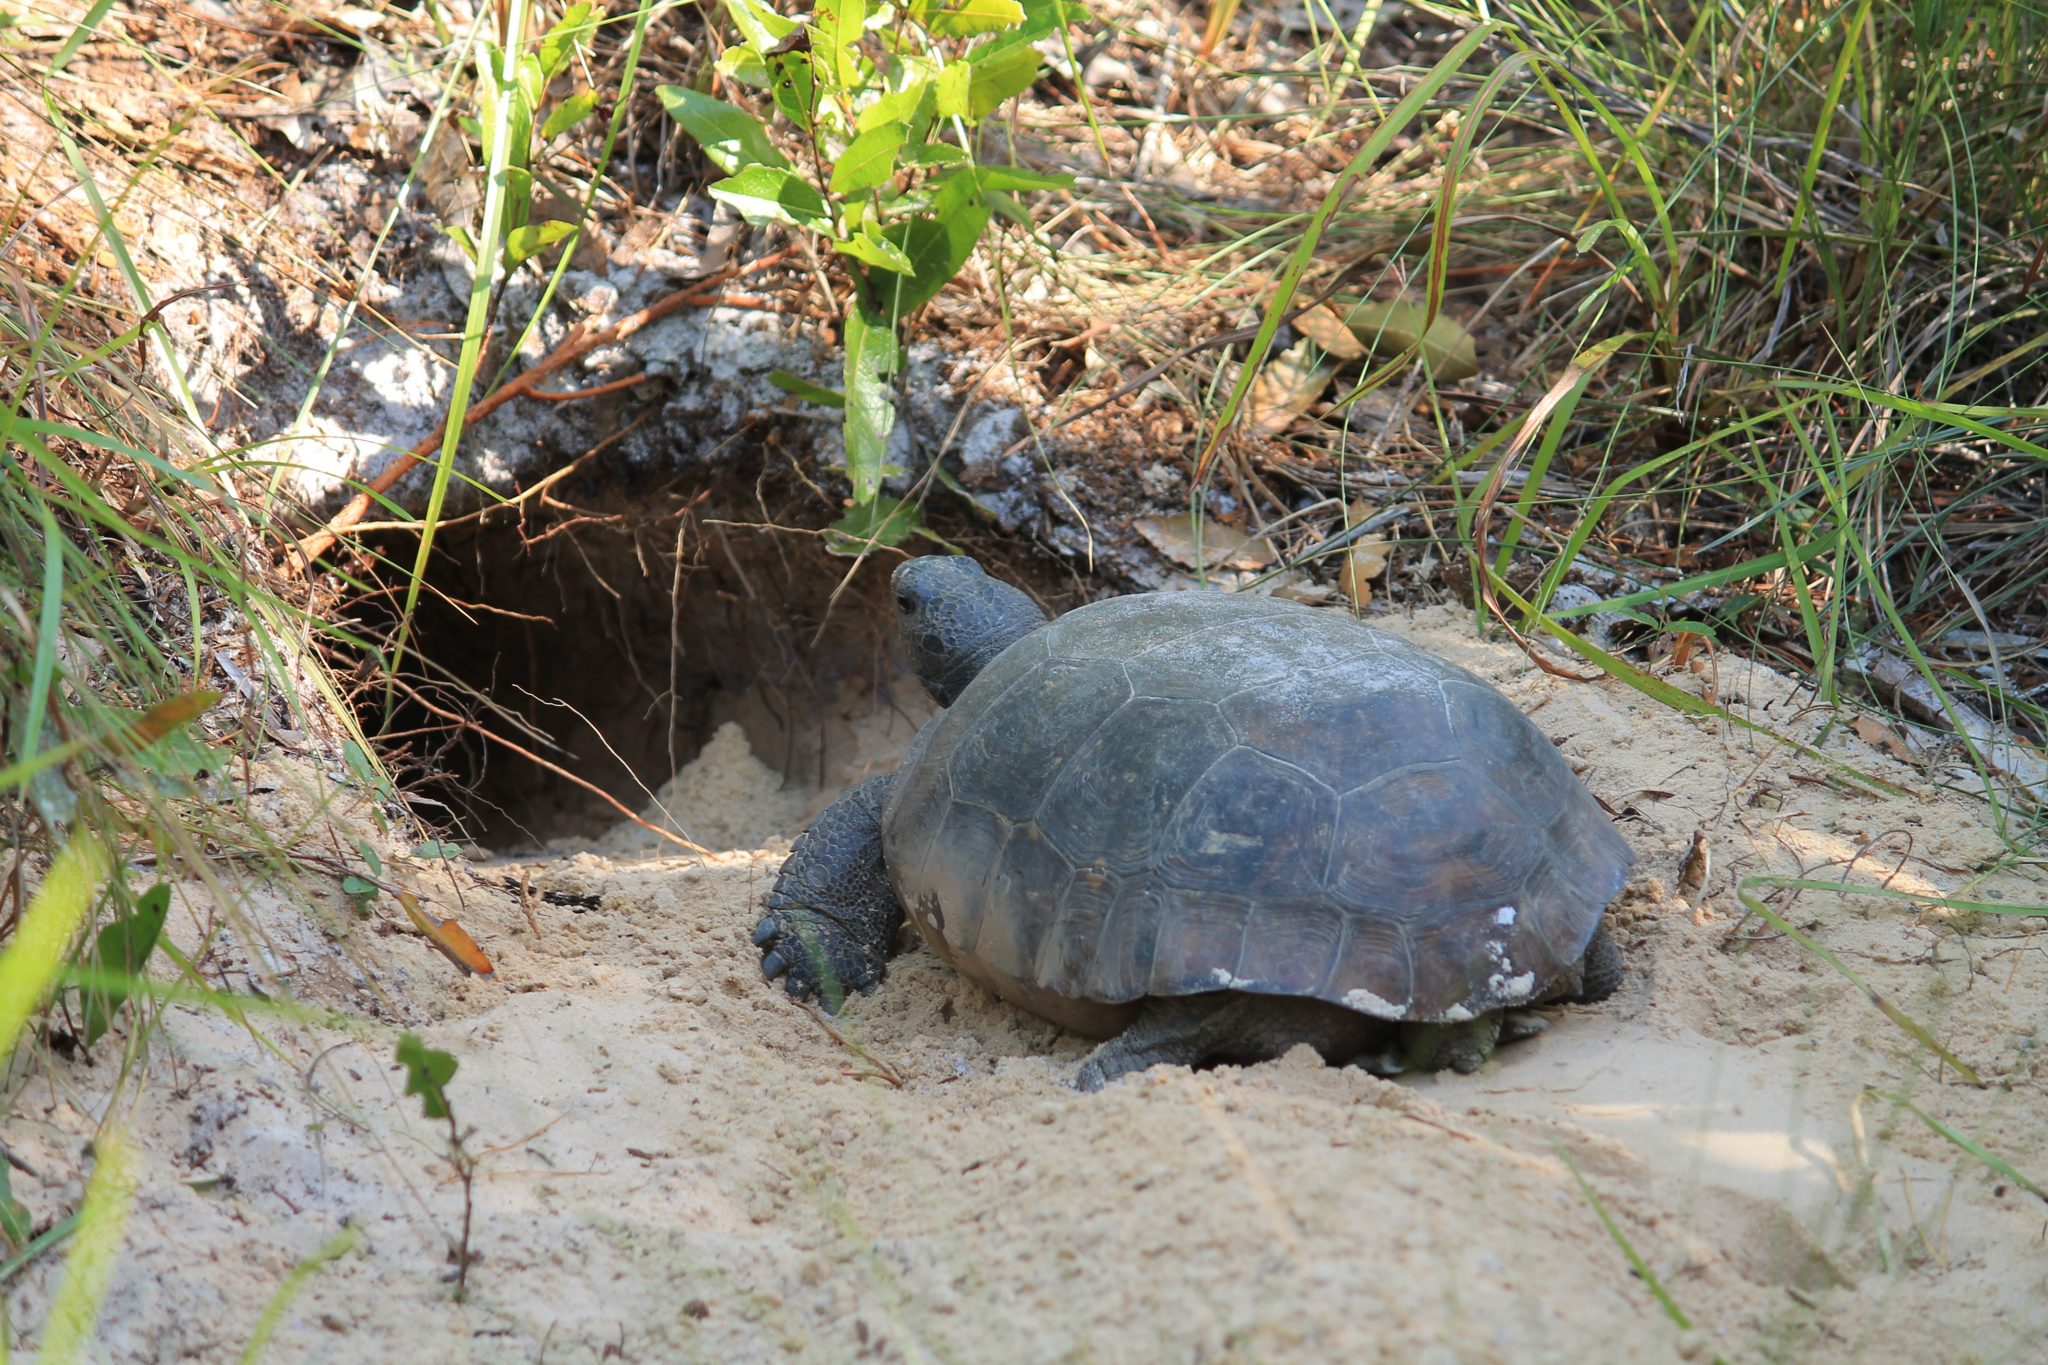 Figure 1. Gopher tortoise in front of burrow entrance. iStock photo by Shellphoto.